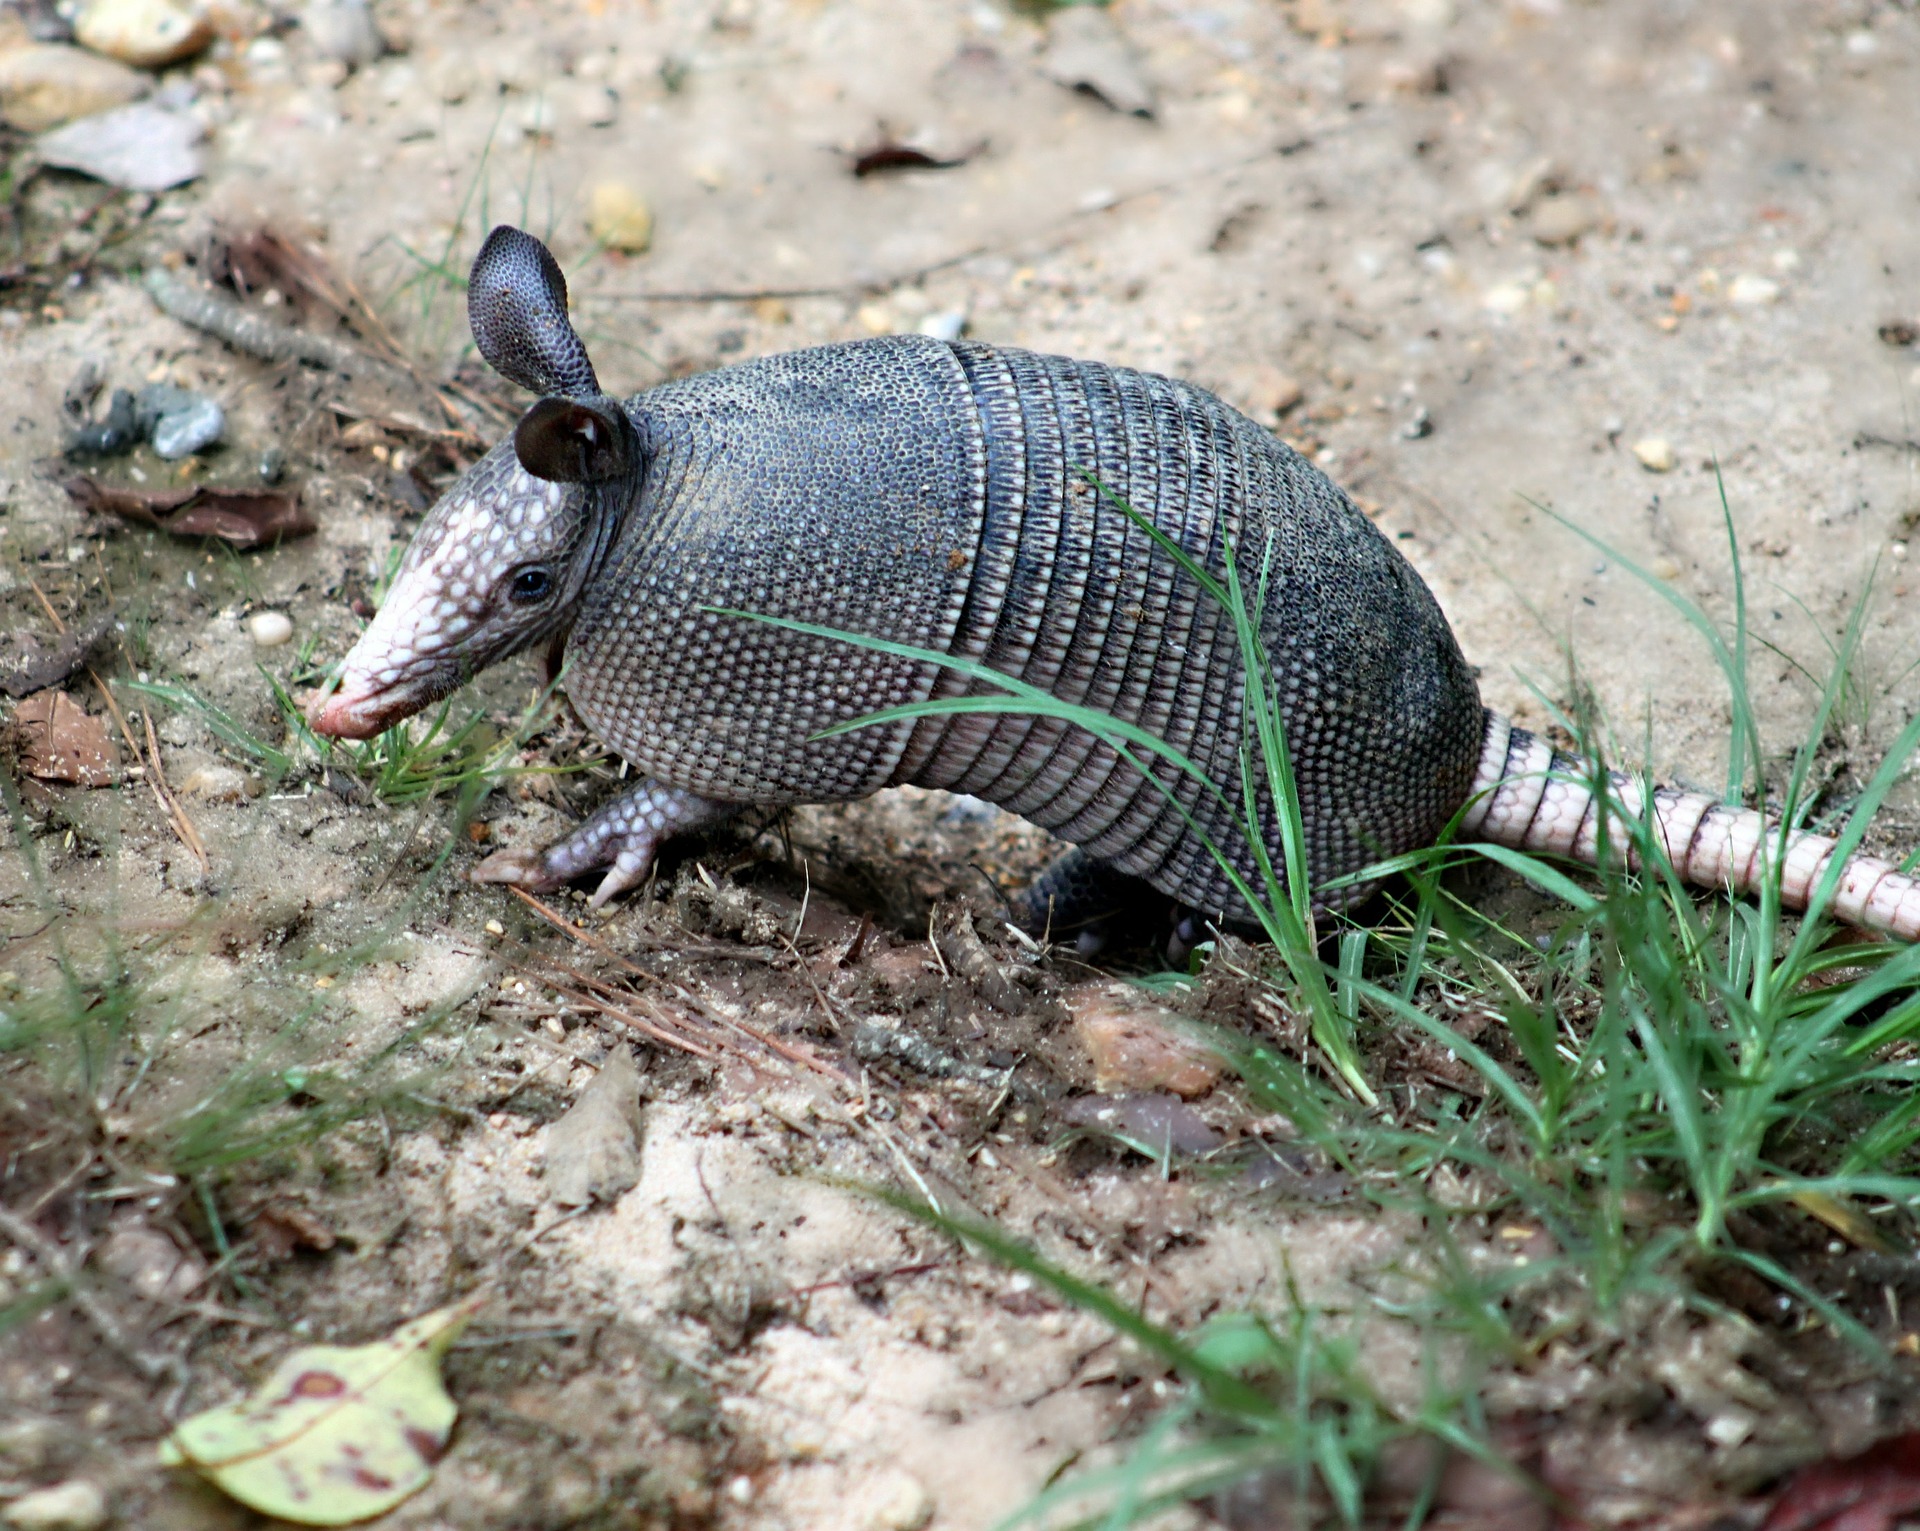 See armadillos and more when you explore the wildlife in Texas